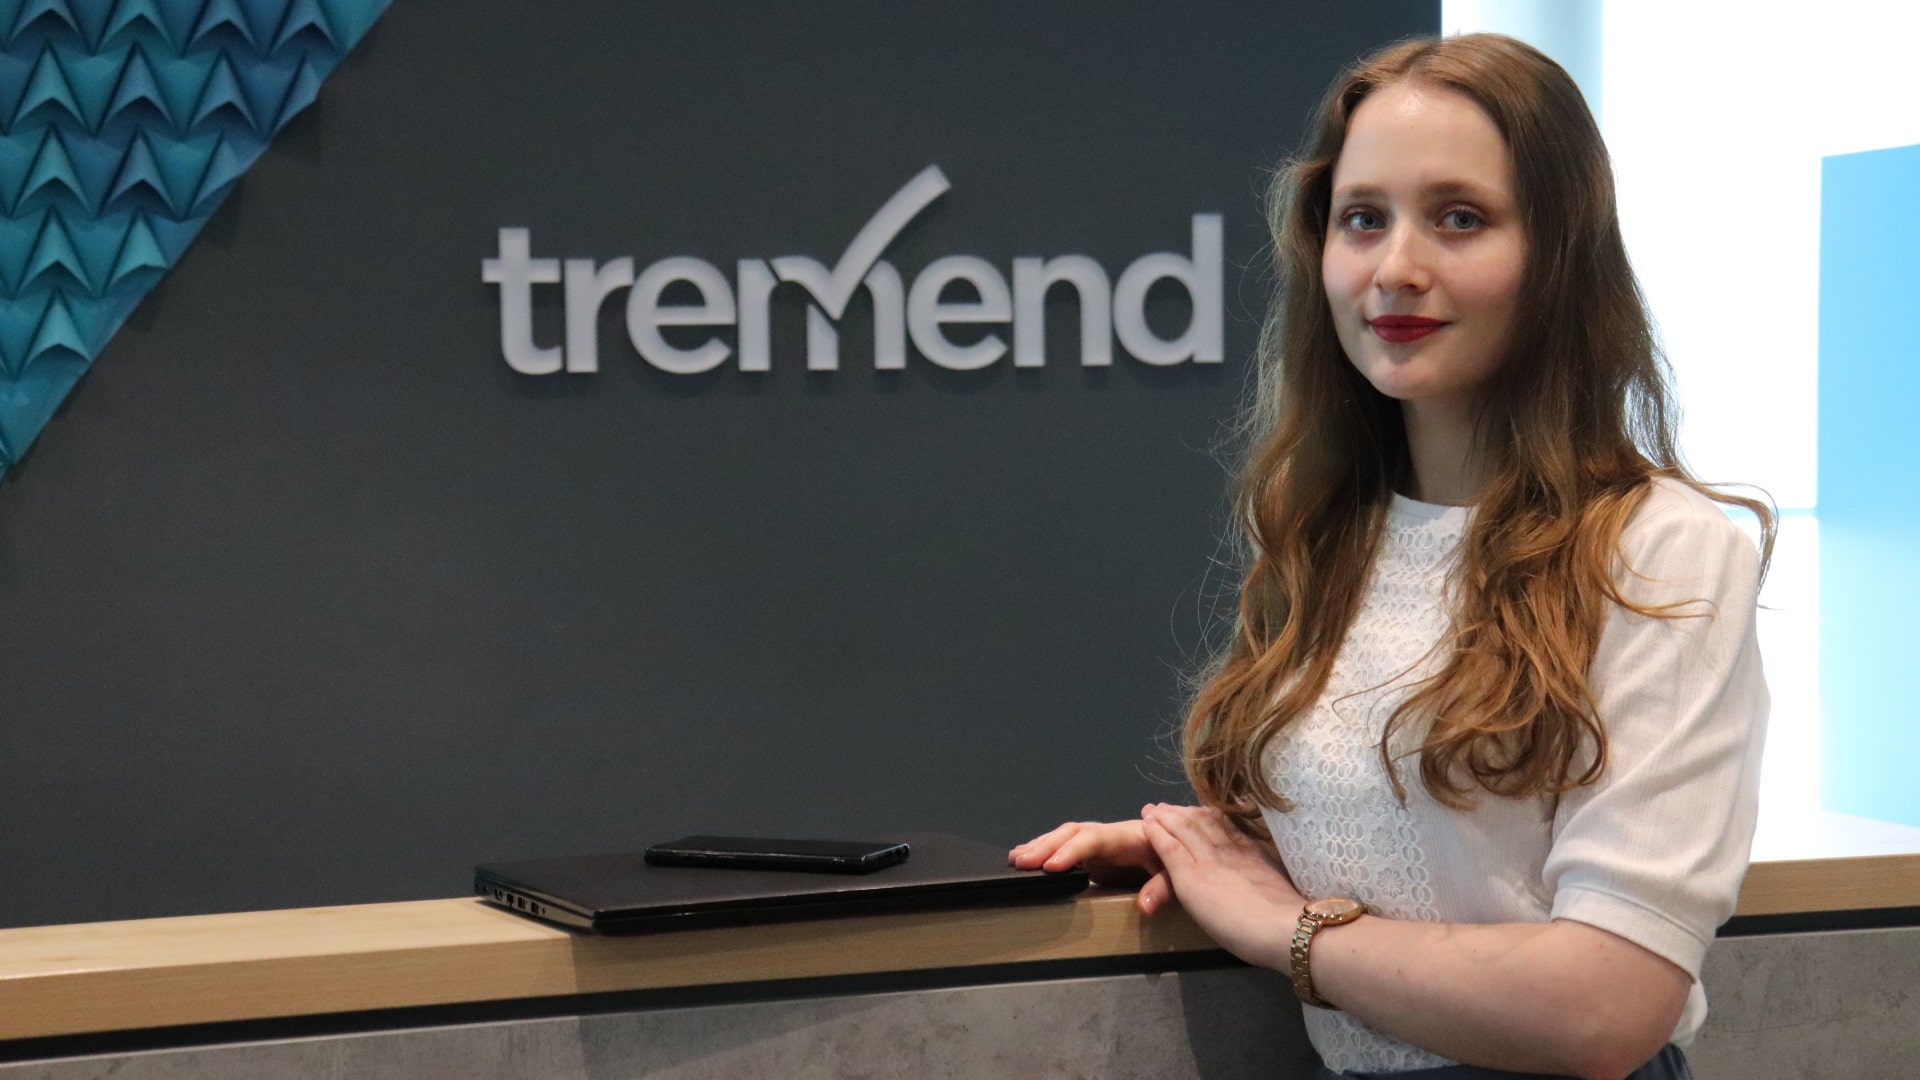 Step behind the scenes of #LifeAtTremend (part I)